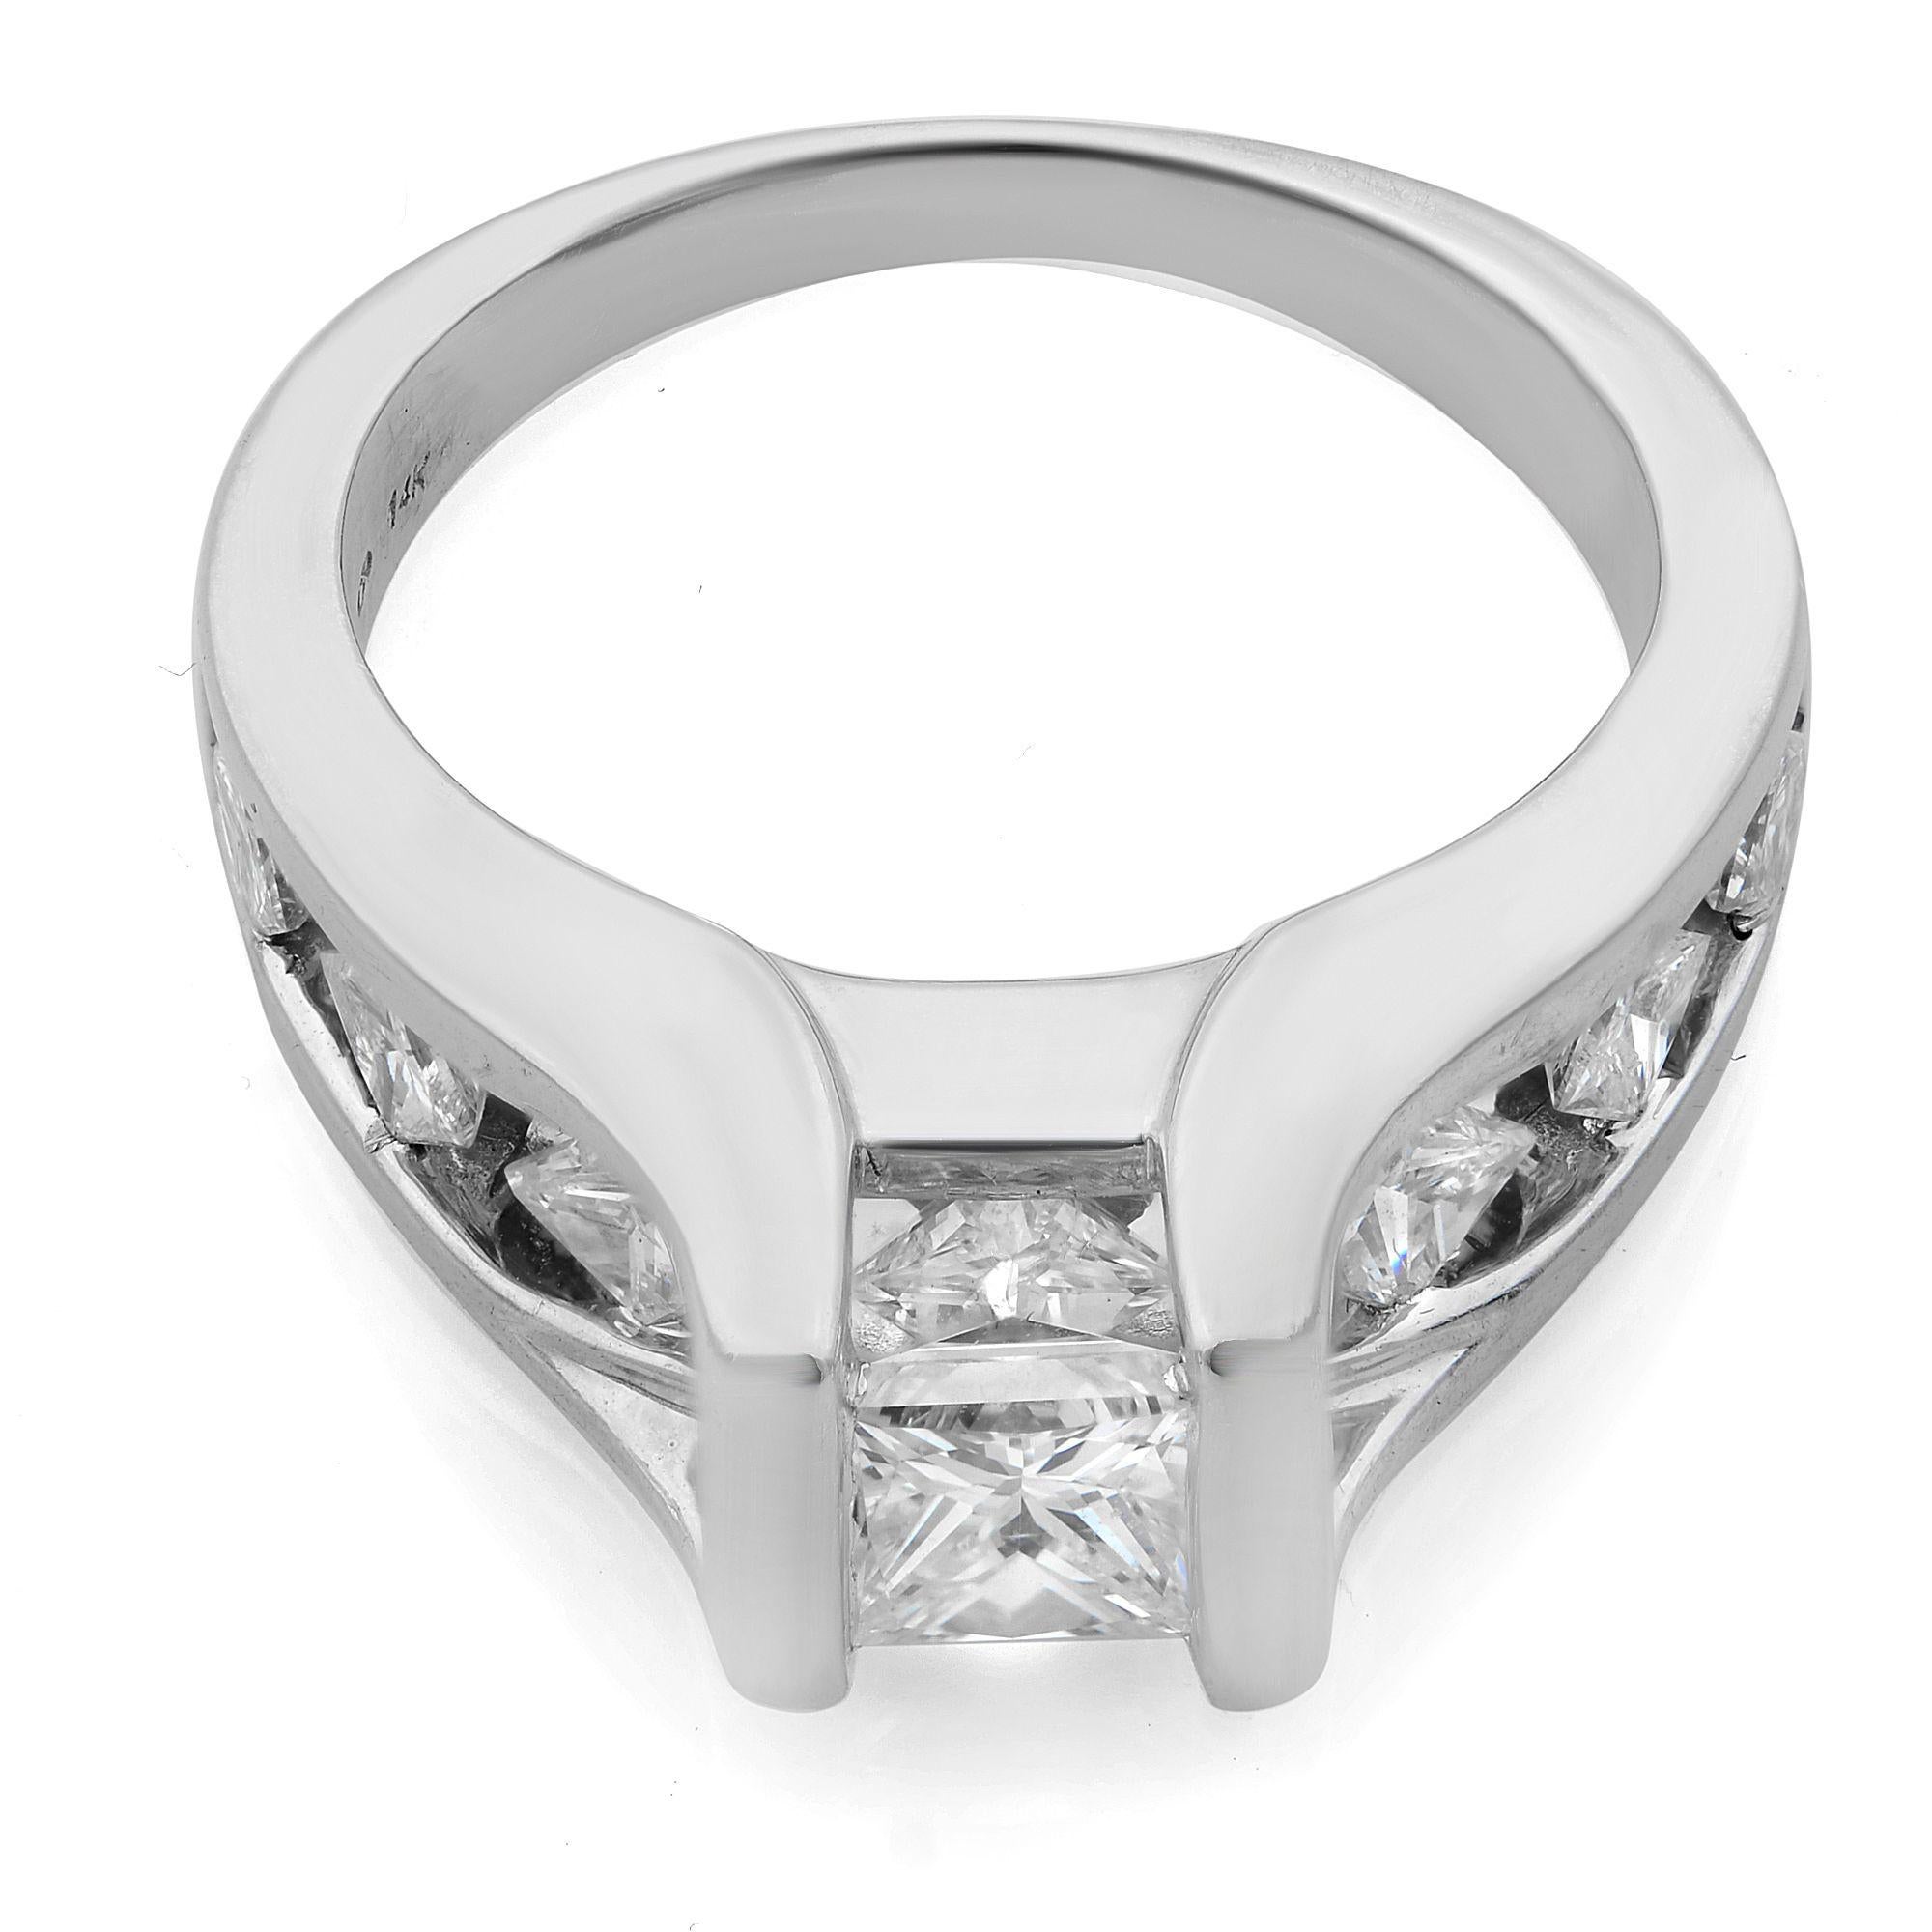 This ring is new and comes with a gift box and appraisal card. It's made of 14K white gold. Center stone: apprx. 1.01 cttw princess cut diamond; accents stones: 7 princess cut white diamonds of appx. 1.6 cttw. Total 2.61 Cttw. Size of the ring is 7,